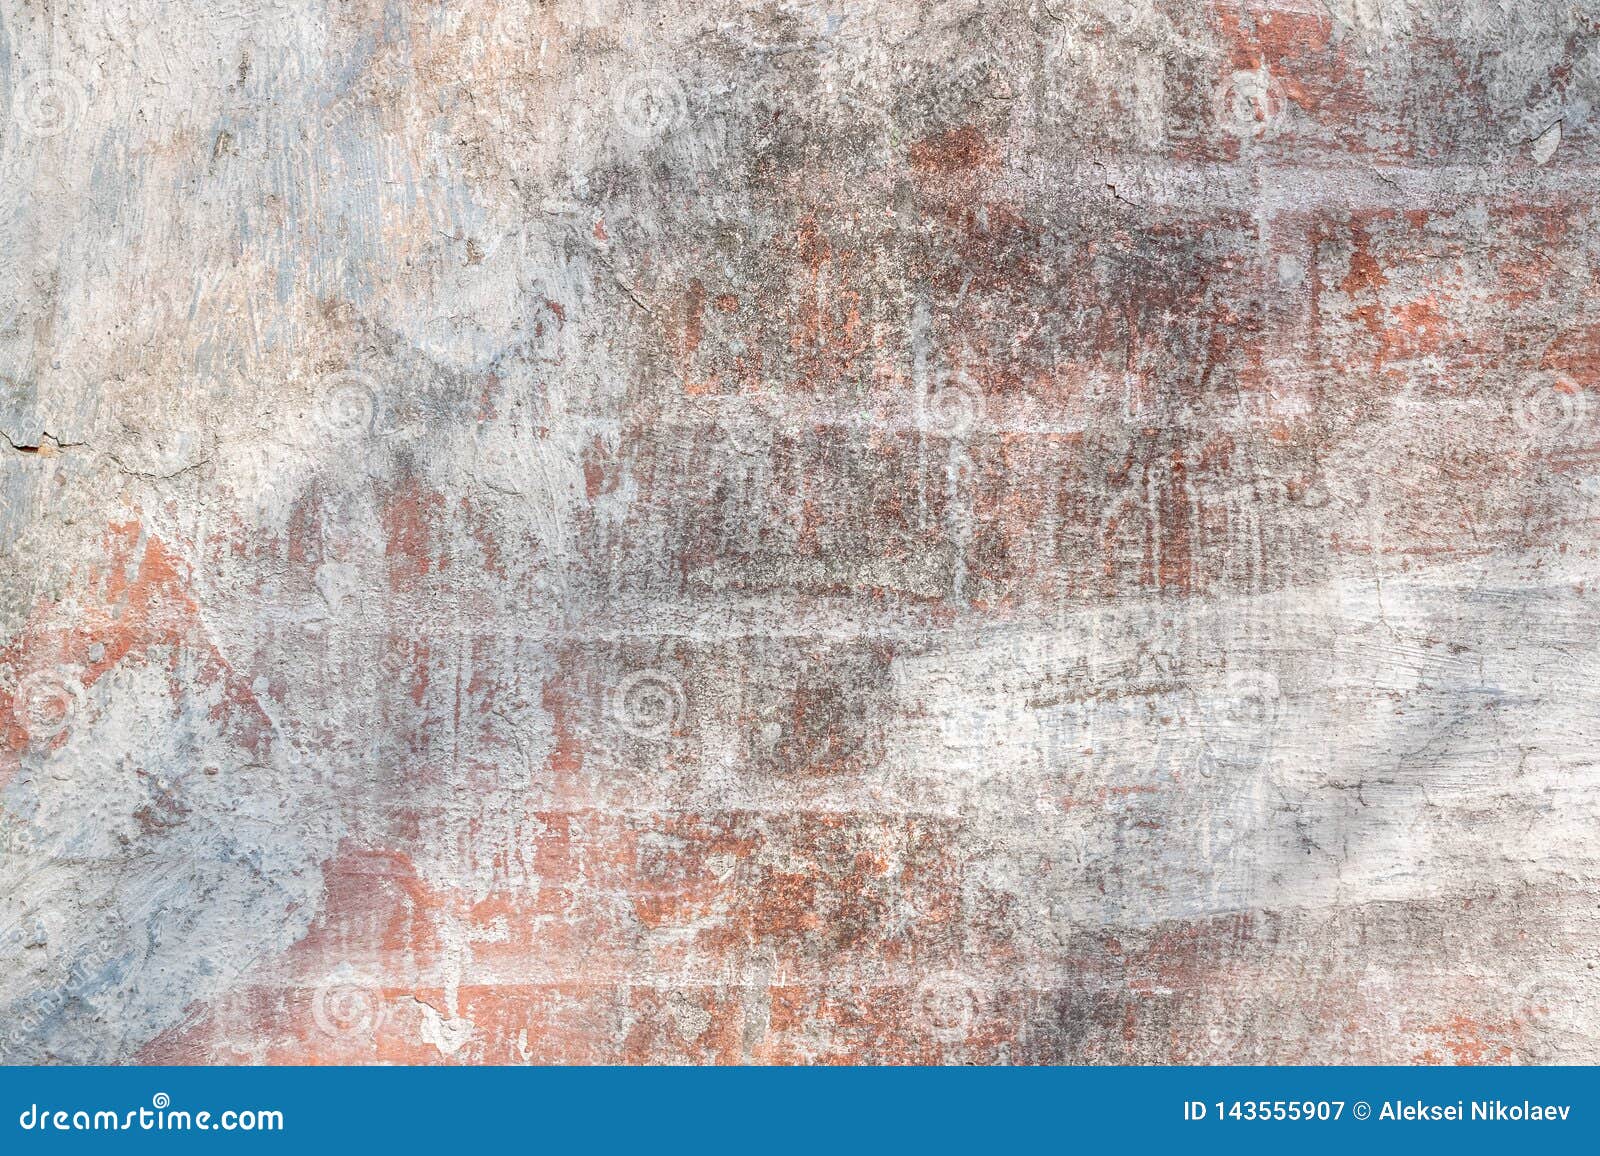 Download Texture Background Of Old Brick Wall With White Paint For Mockup Or Design In Construction Food Or Industrial Pattern Stock Image Image Of Antique Aging 143555907